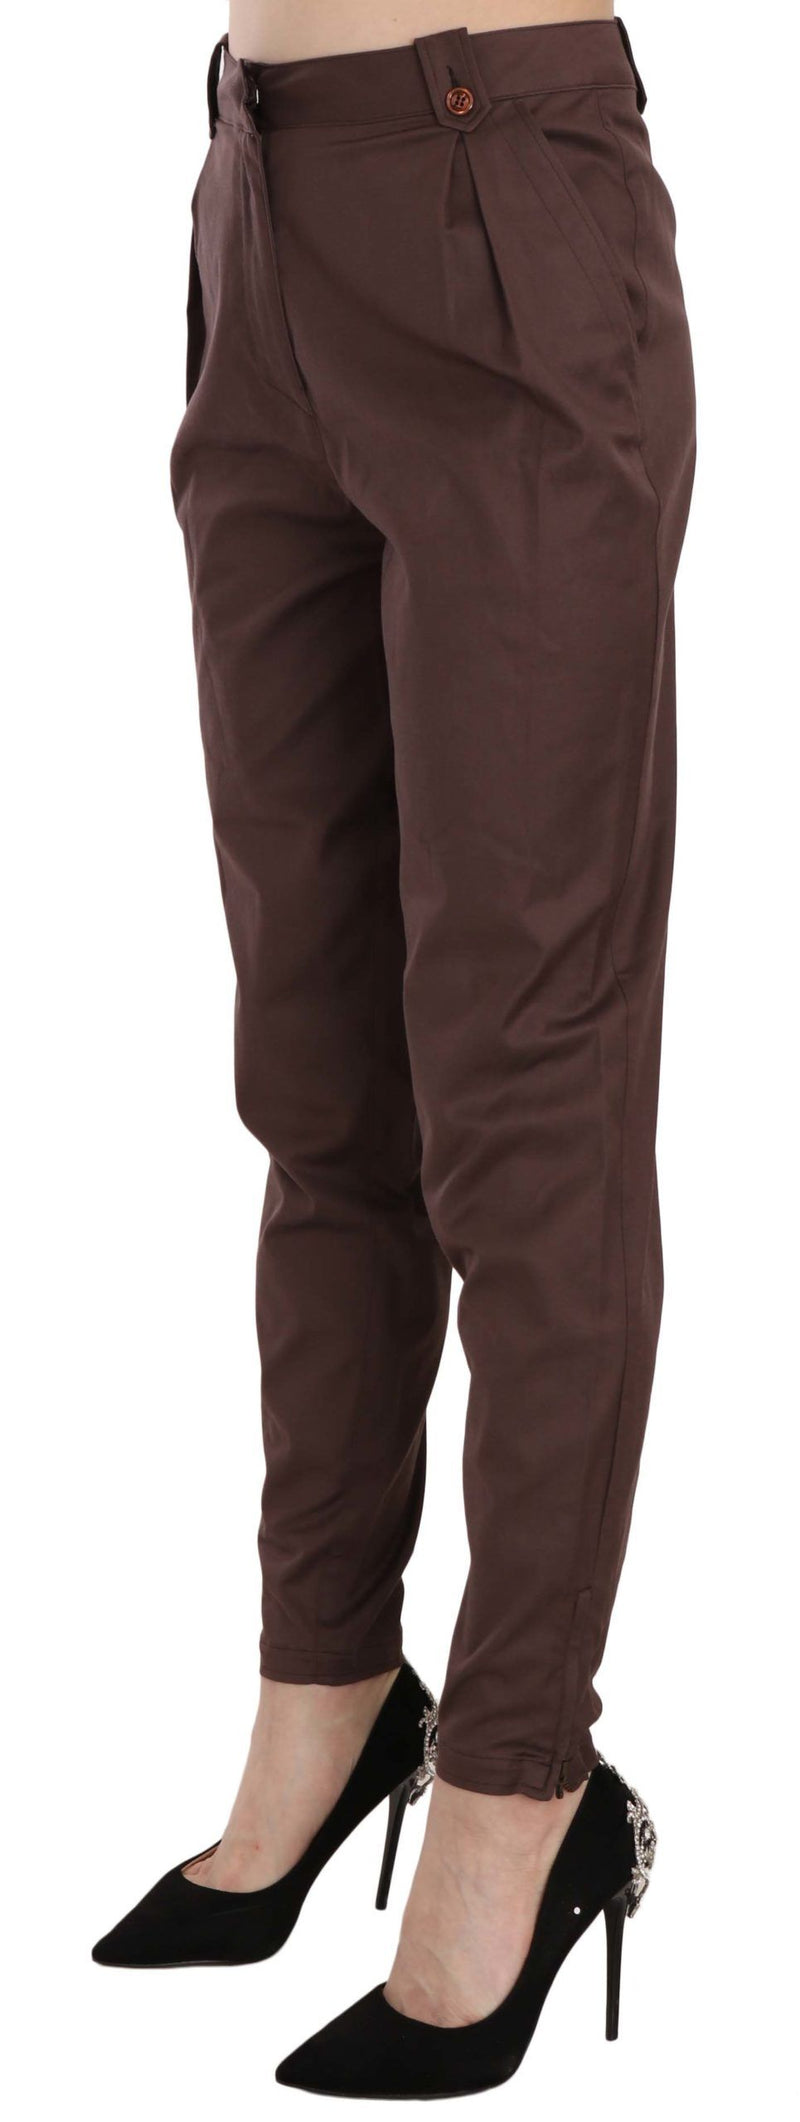 Discover more than 176 tapered formal trousers best